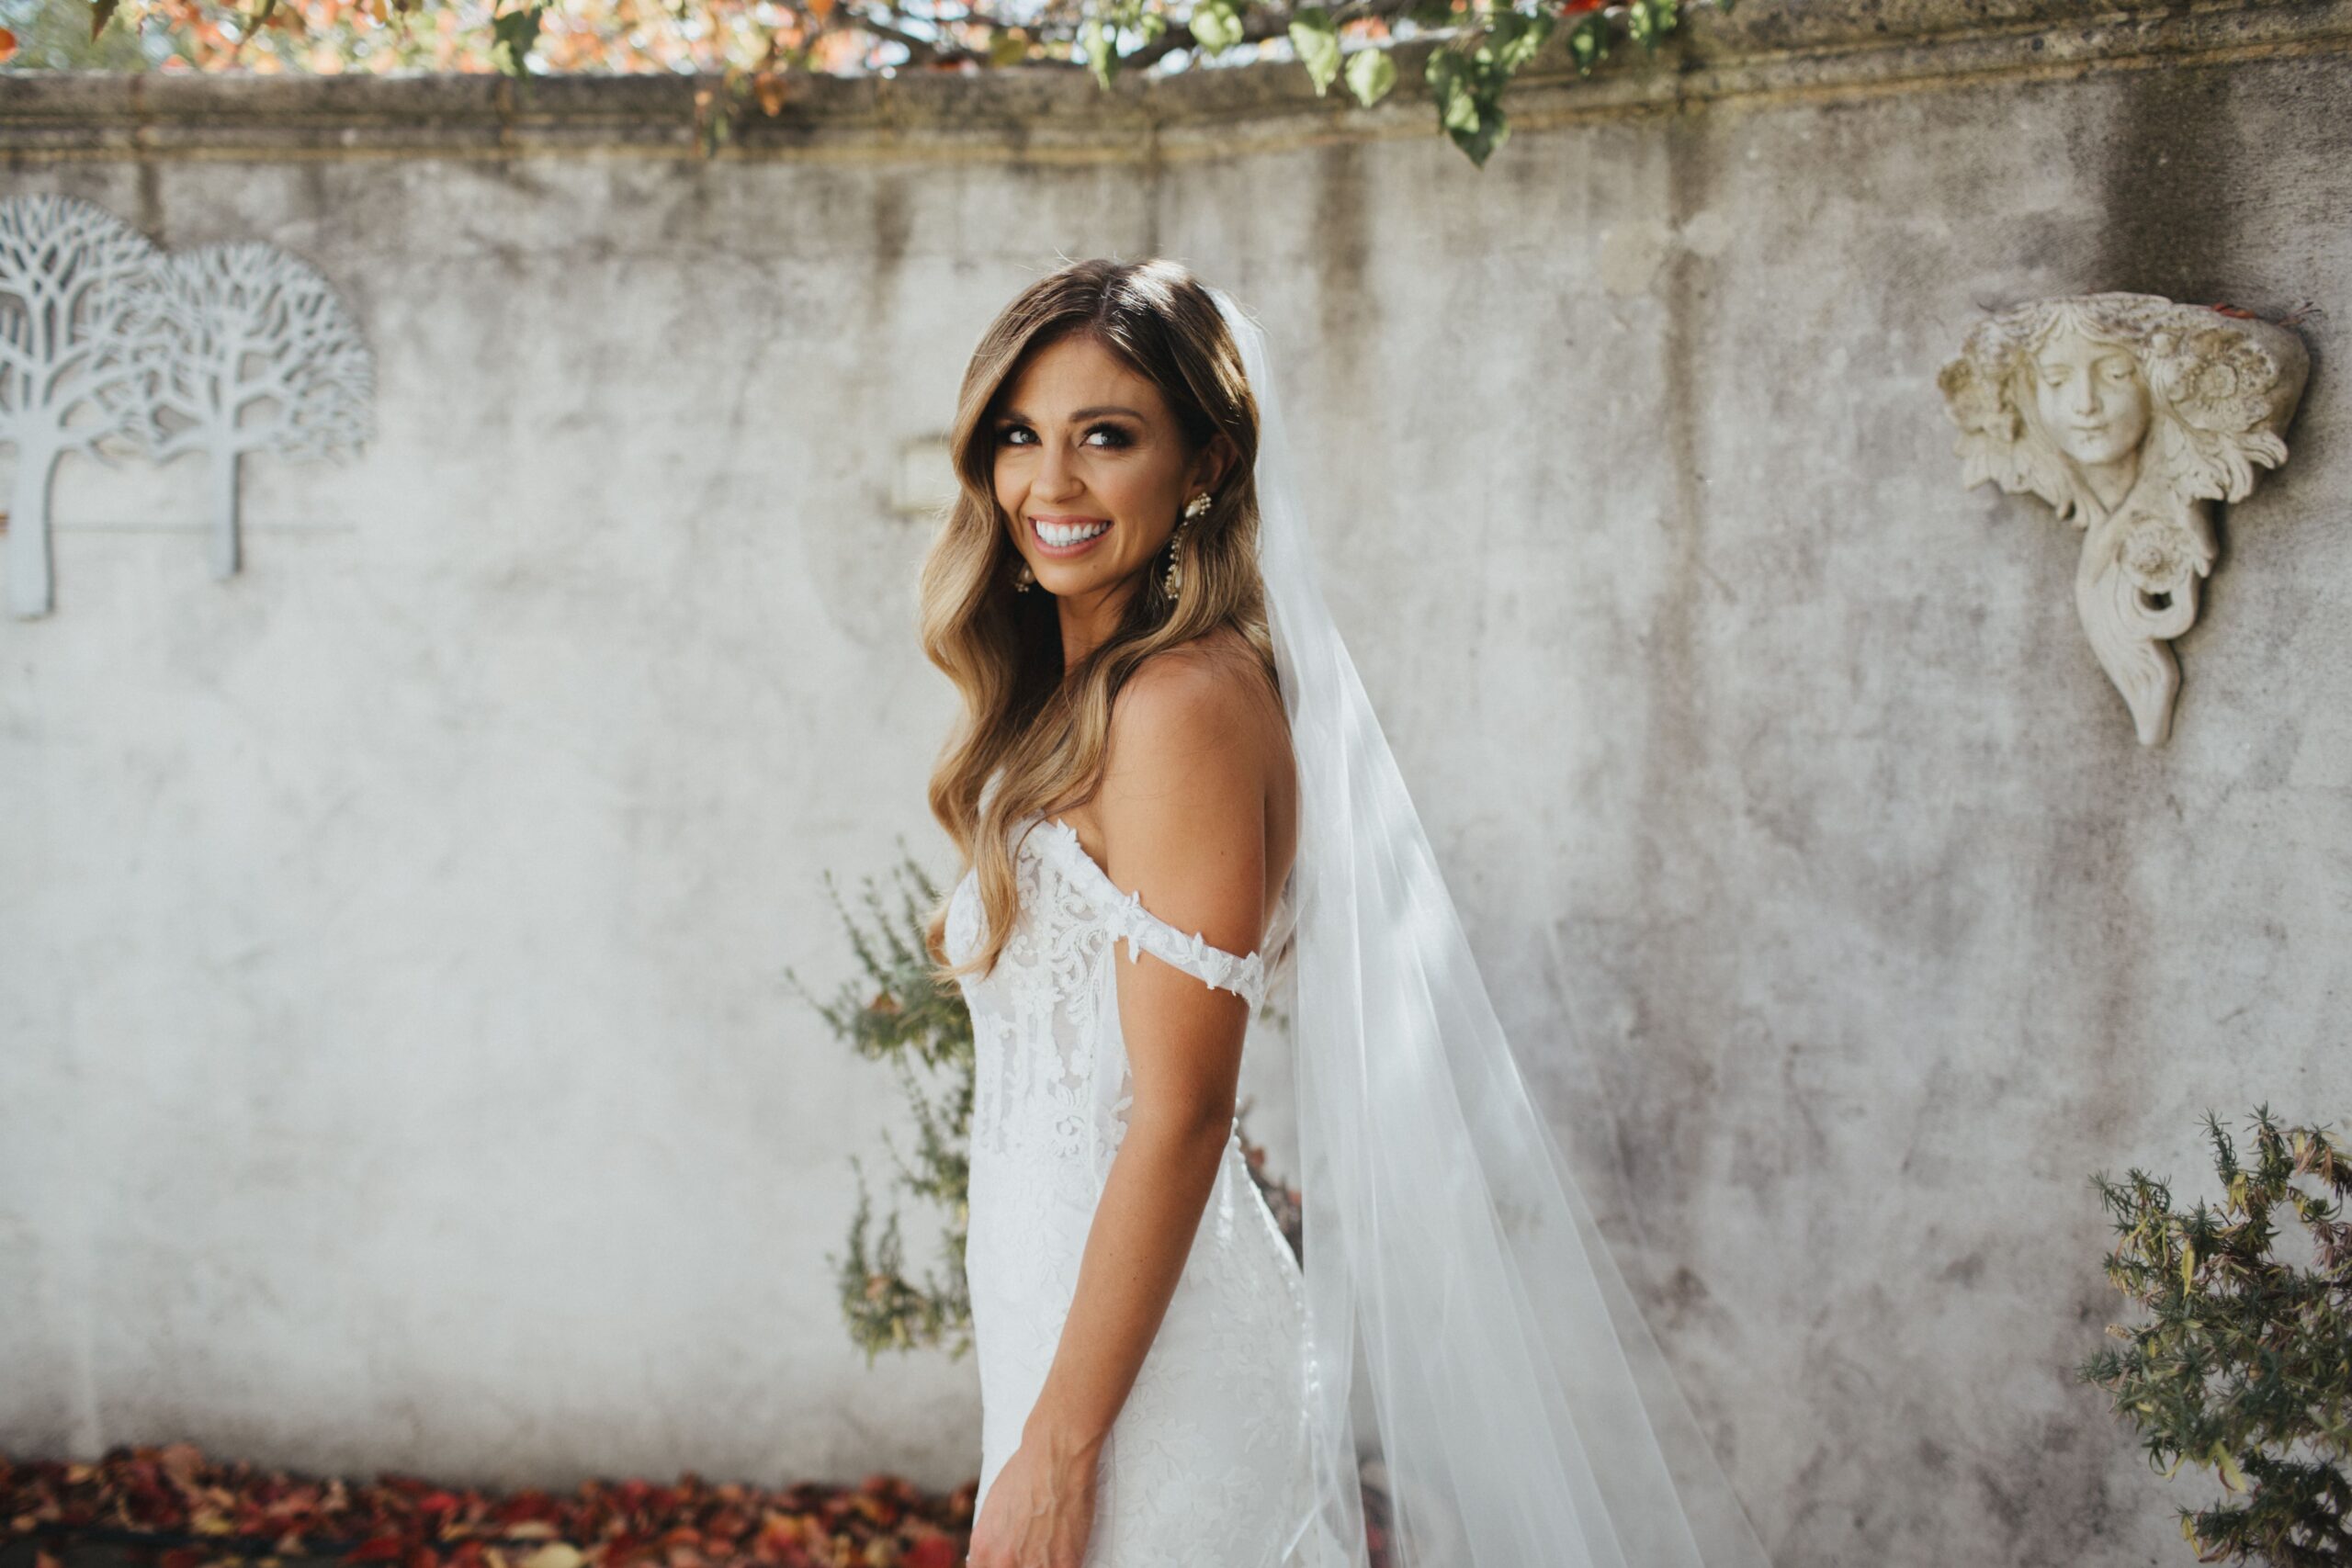 Bride standing in front of concrete wall looking into camera